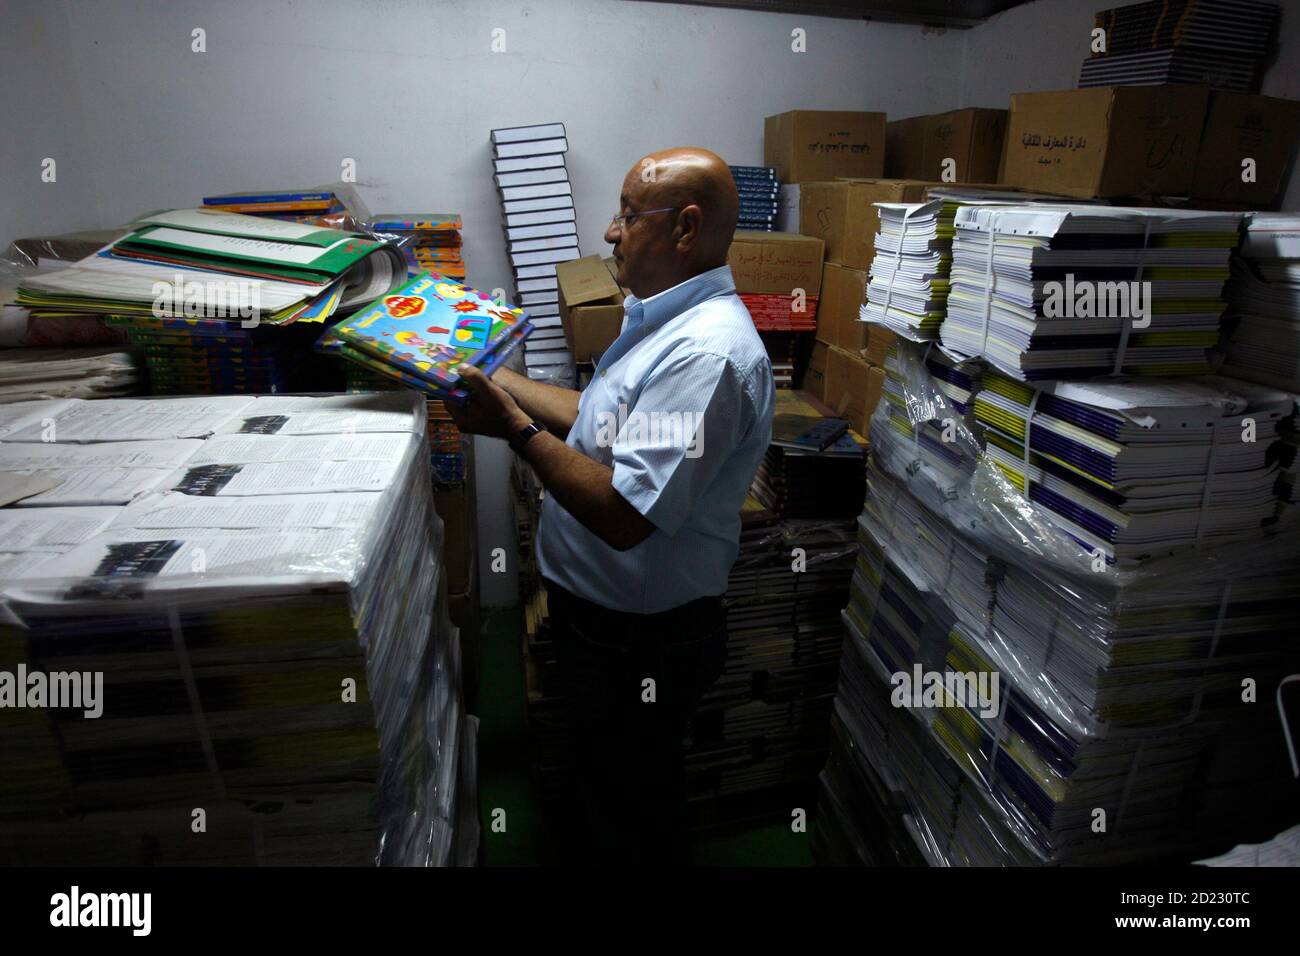 Israeli Saleh Abbasi holds children's books in his publishing house in the northern Israeli city of Haifa August 18, 2008. Abbasi says he wants to use his publishing business to foster cultural ties between Israel and its Arab neighbours, but his plan was dealt a setback by a ban on importing books from Lebanon and Syria. Israel has no diplomatic ties with Beirut and Damascus, so Abbasi, an Arab citizen of the Jewish state, has been using Jordan and Egypt as conduits to trade books with publishers in Lebanon and Syria. Picture taken August 18, 2008. To match feature ISRAEL-BOOKS/BAN  REUTERS/B Stock Photo